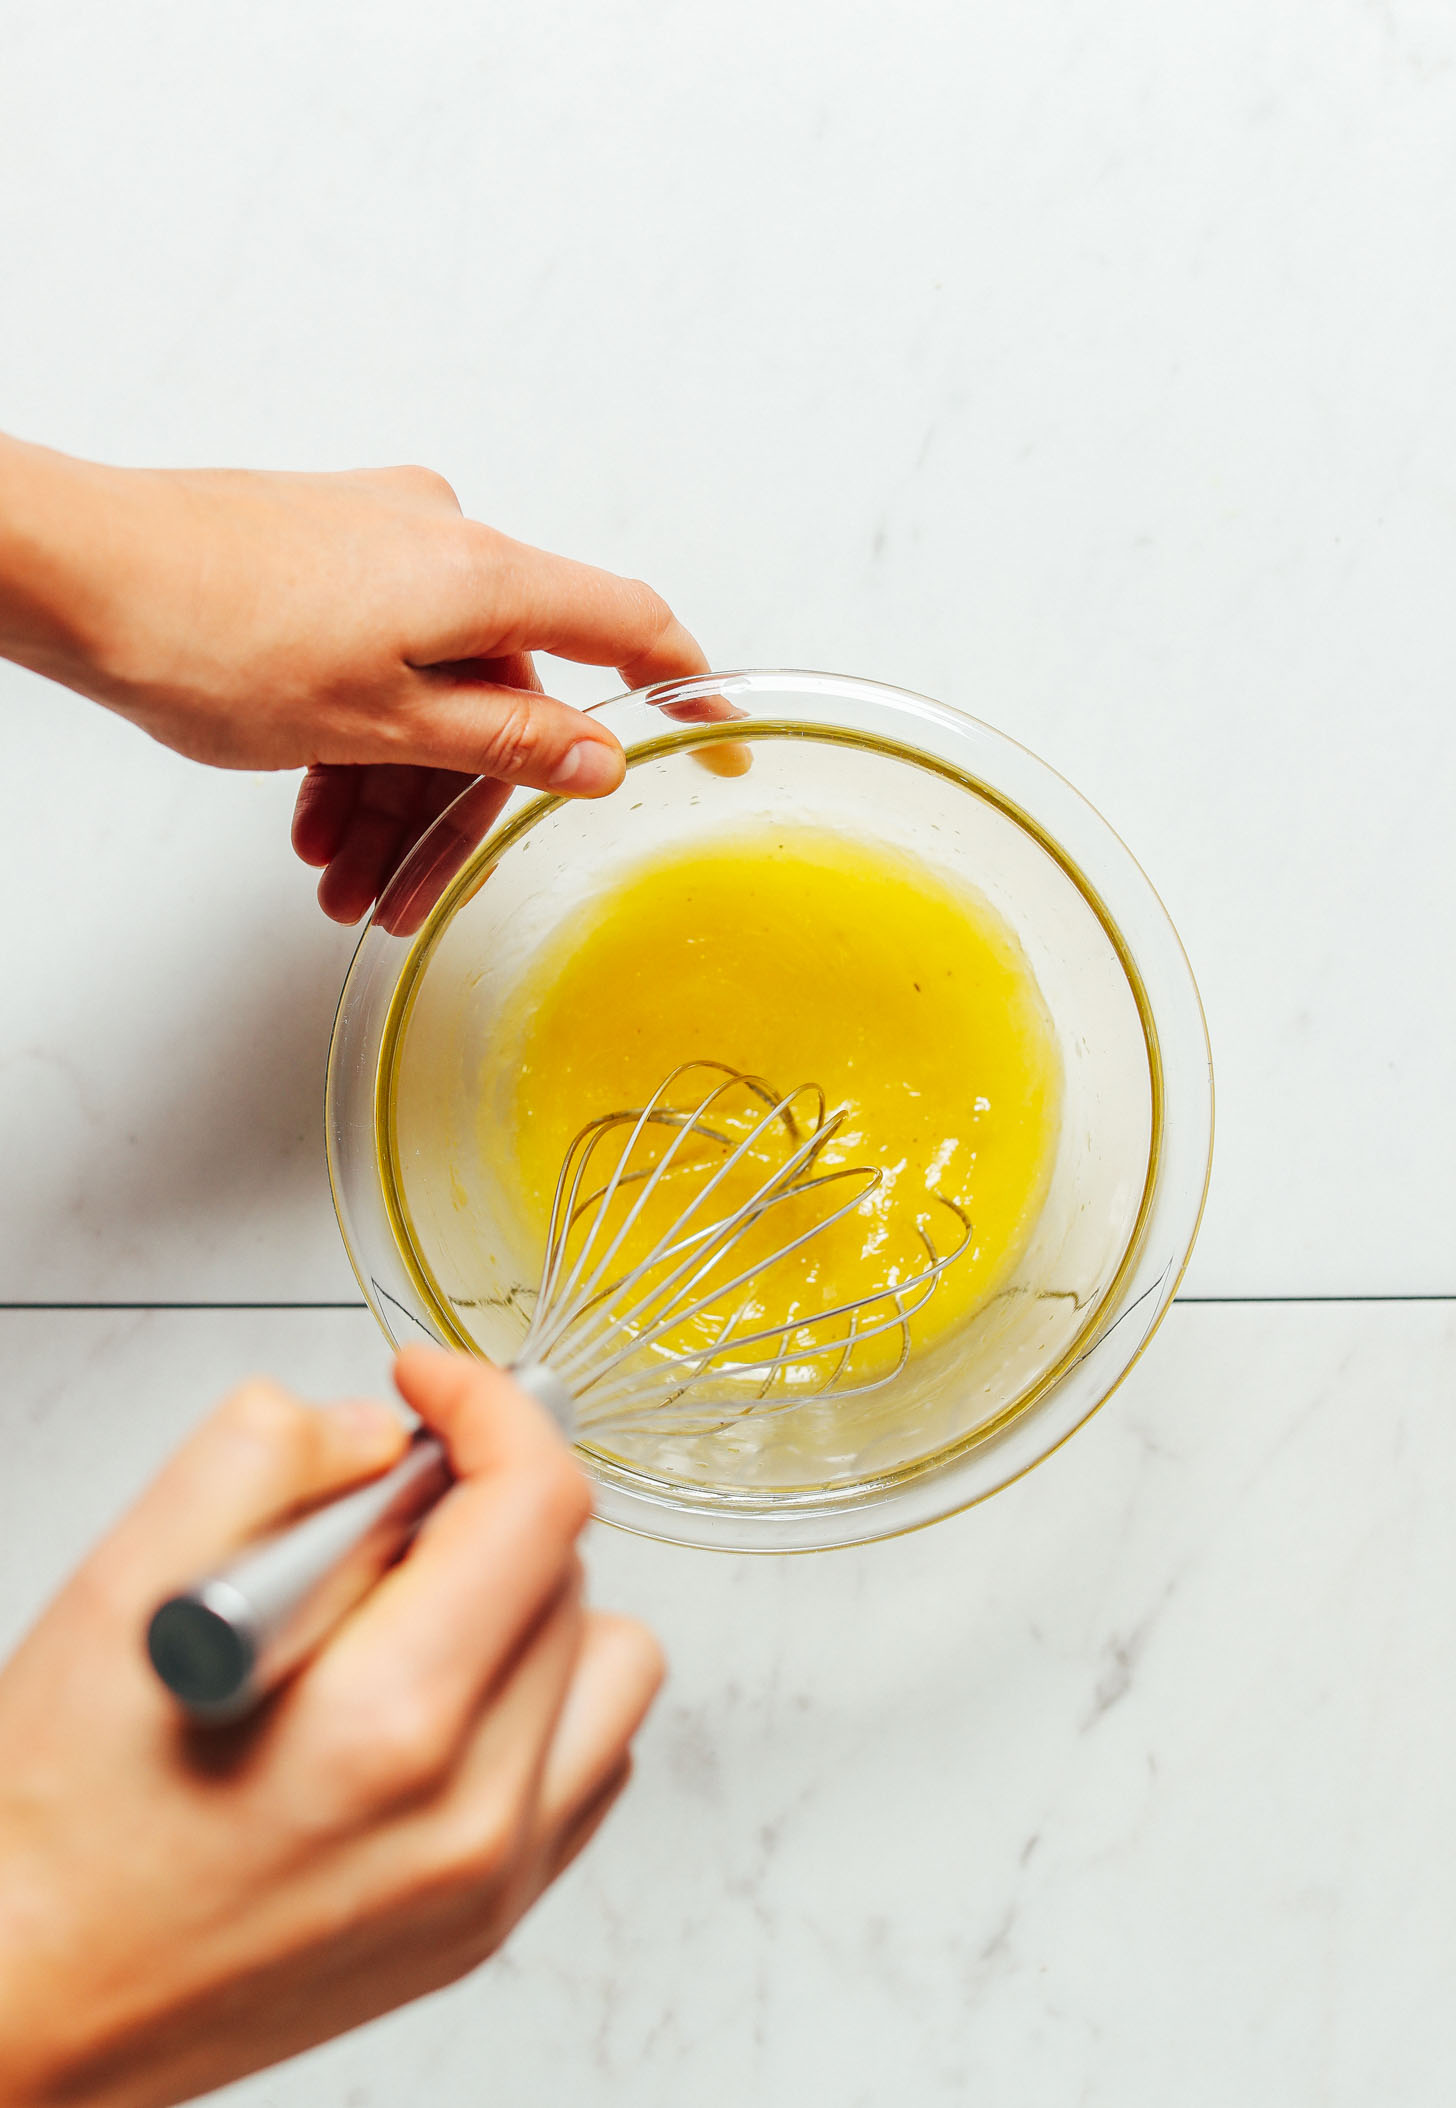 Overhead image of lemon vinaigrette in a glass bowl being whisked by hand